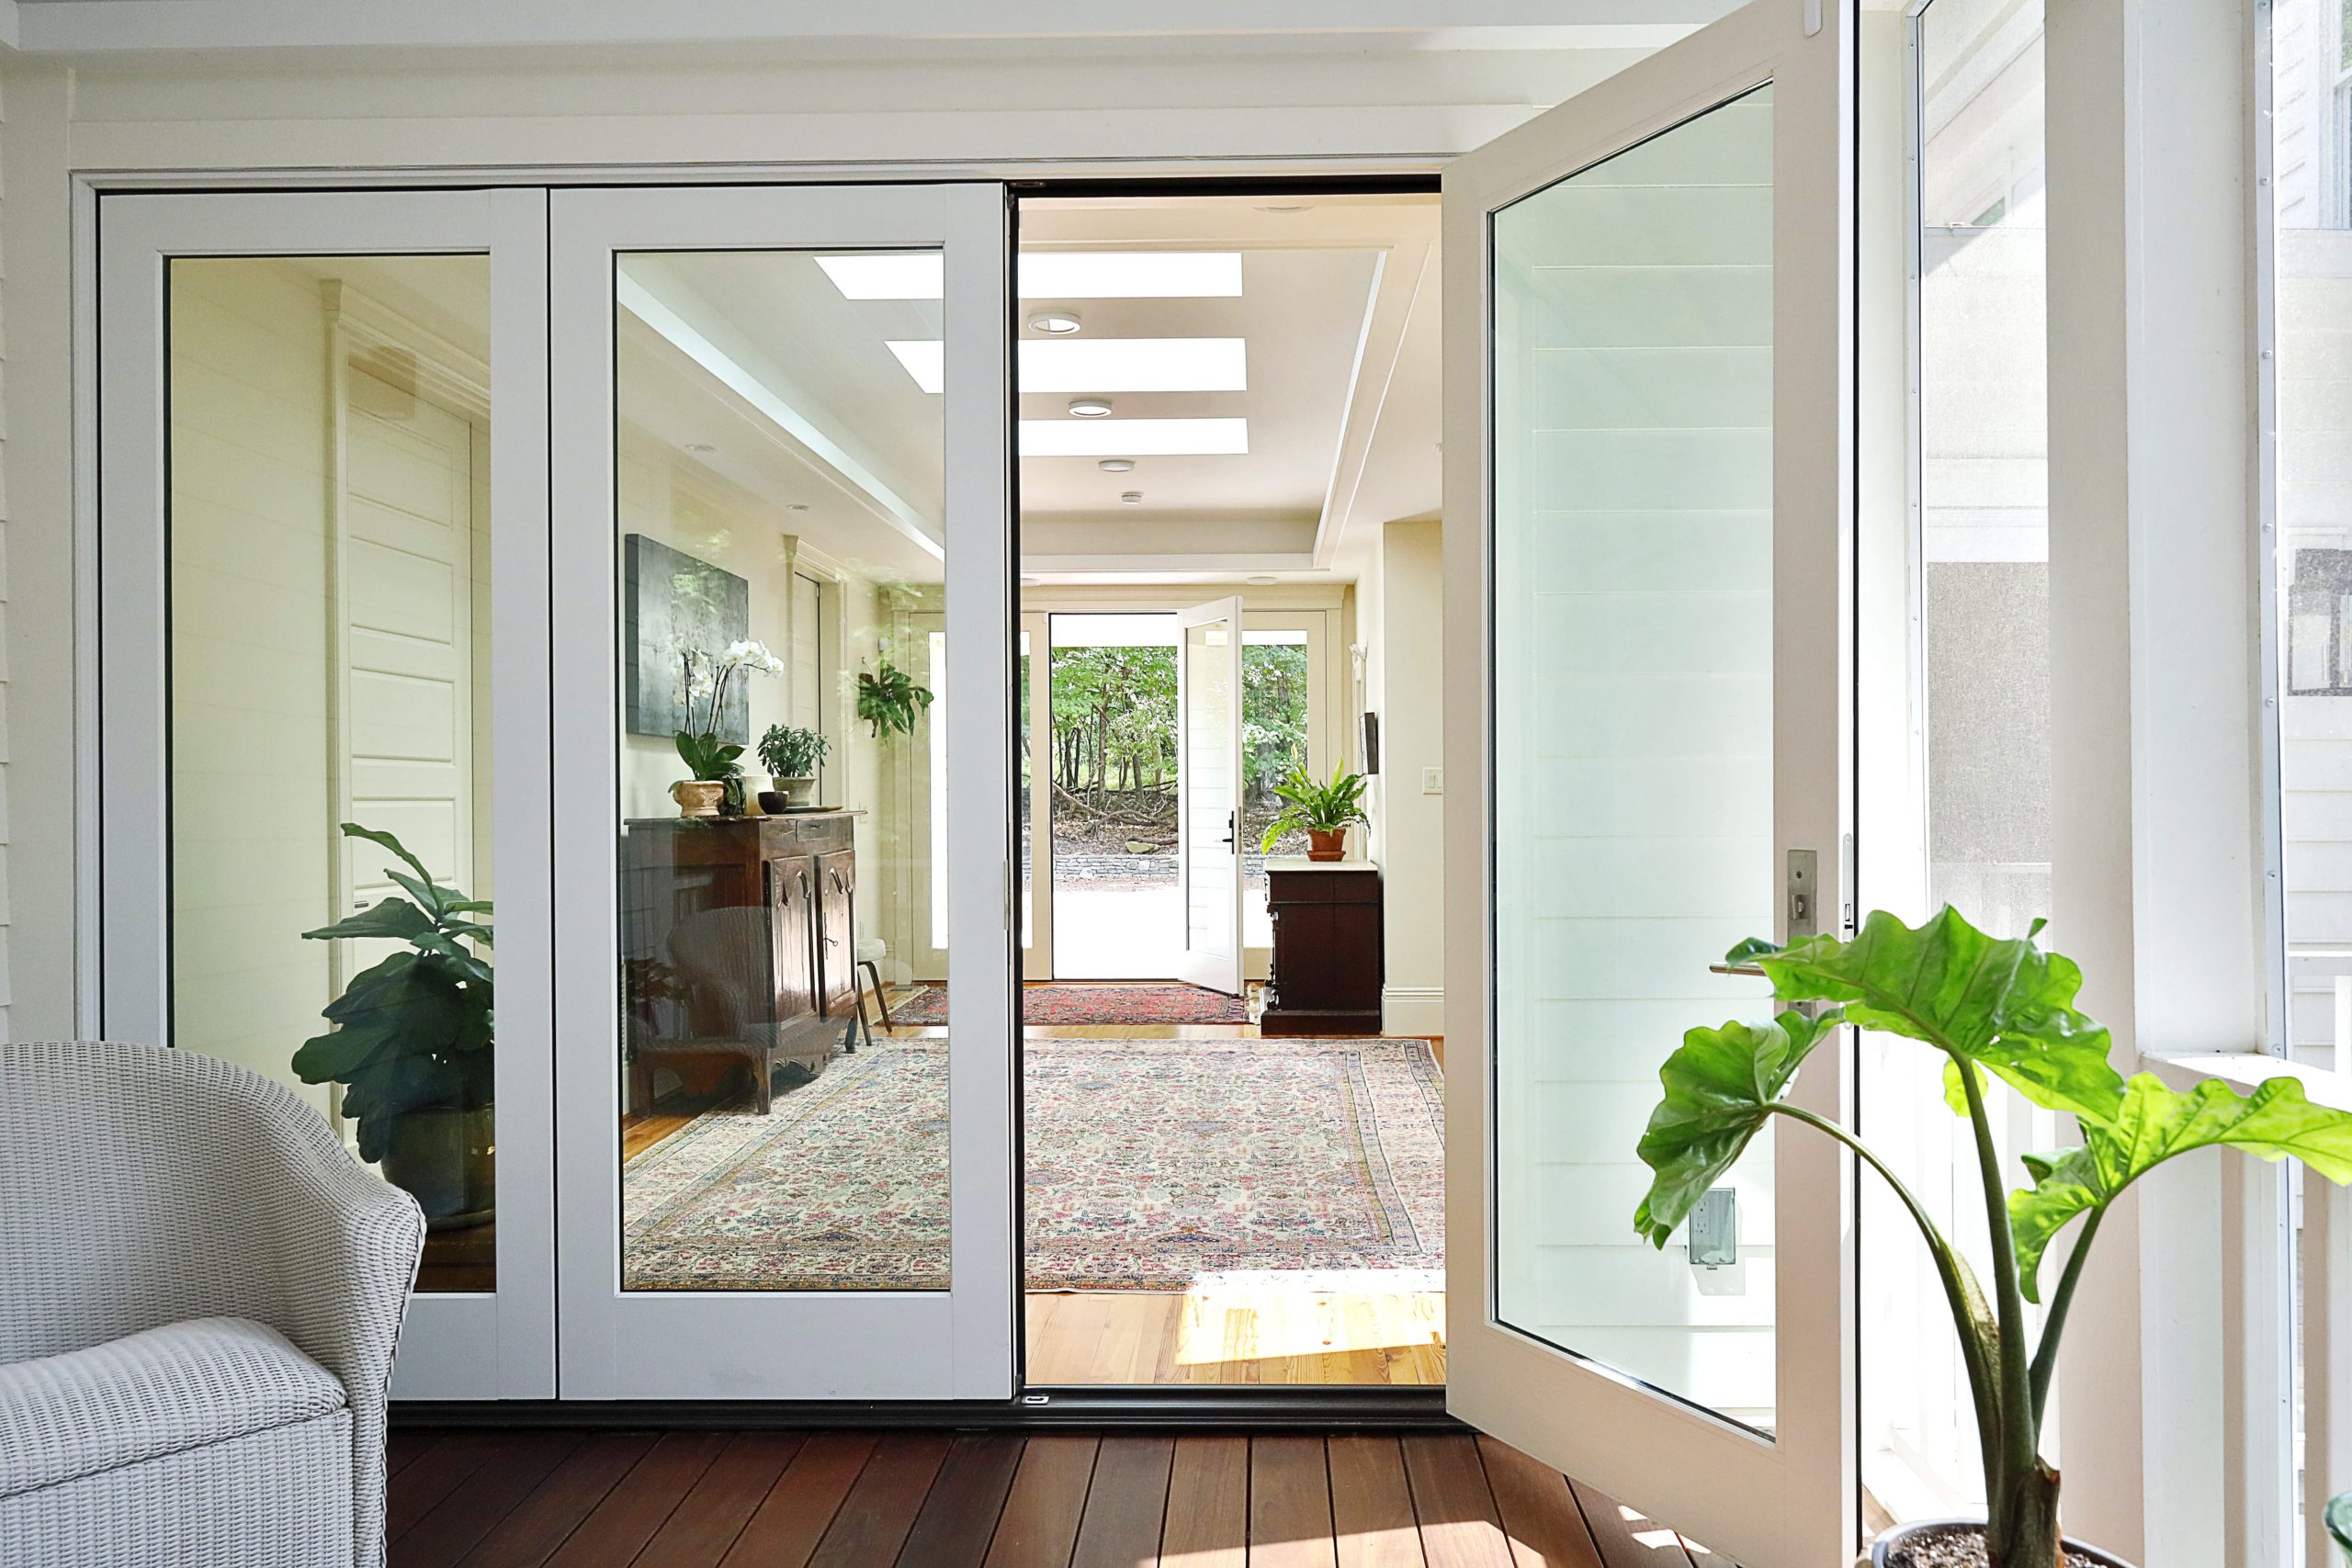 Large glass doors from the foyer to the screened porch create a strong visual connection and invite a feeling of the outdoors into the house